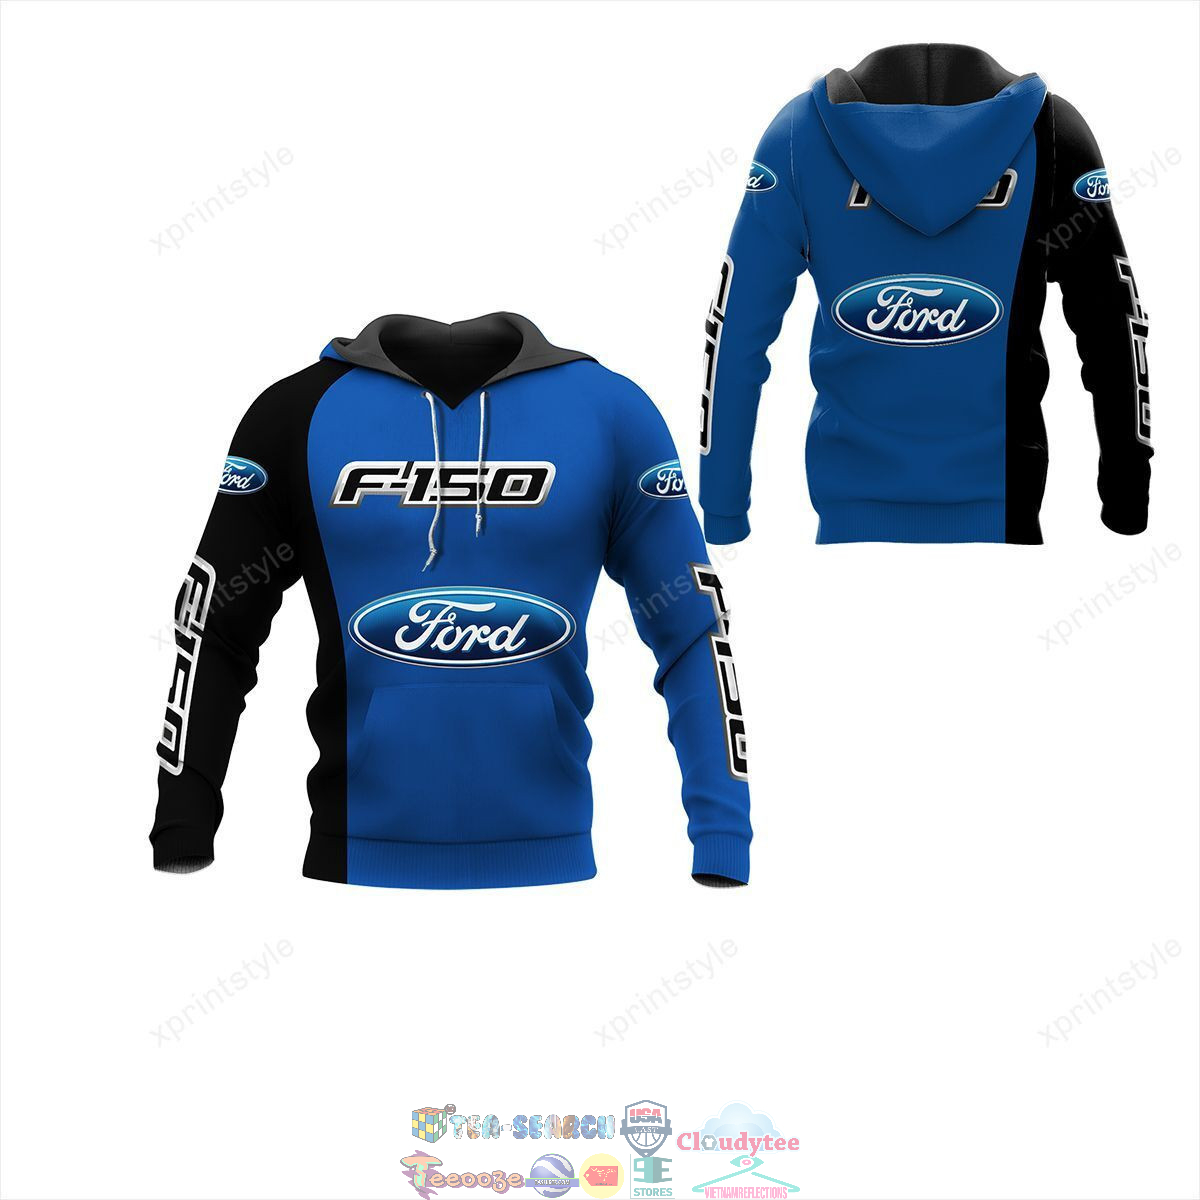 Ford F150 ver 12 hoodie and t-shirt – Saleoff